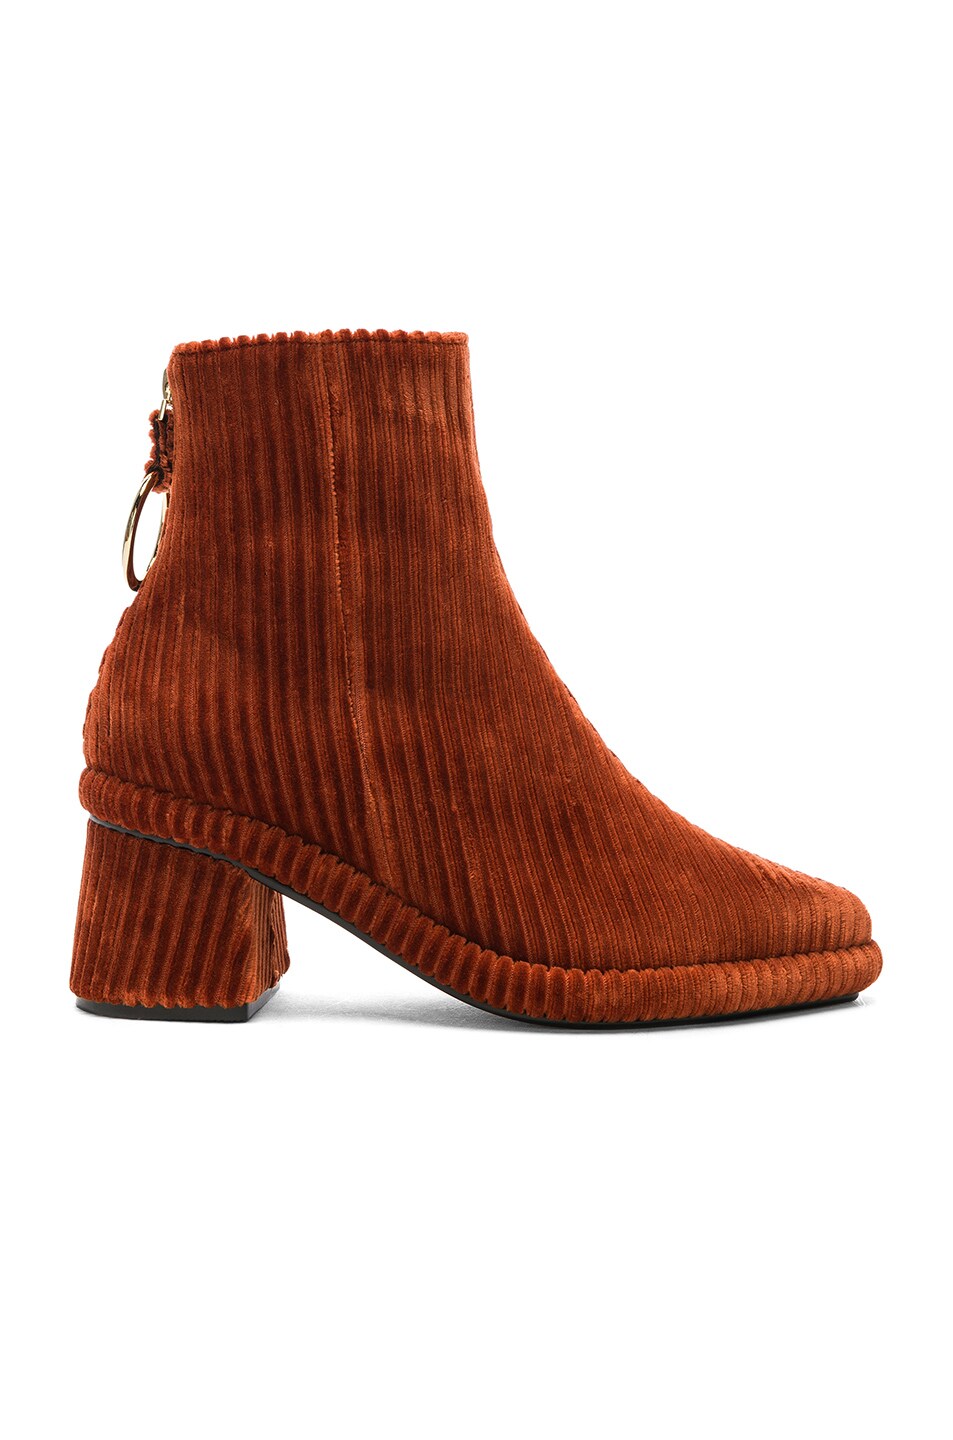 Image 1 of Reike Nen Corduroy Ring Slim Boots in Copper